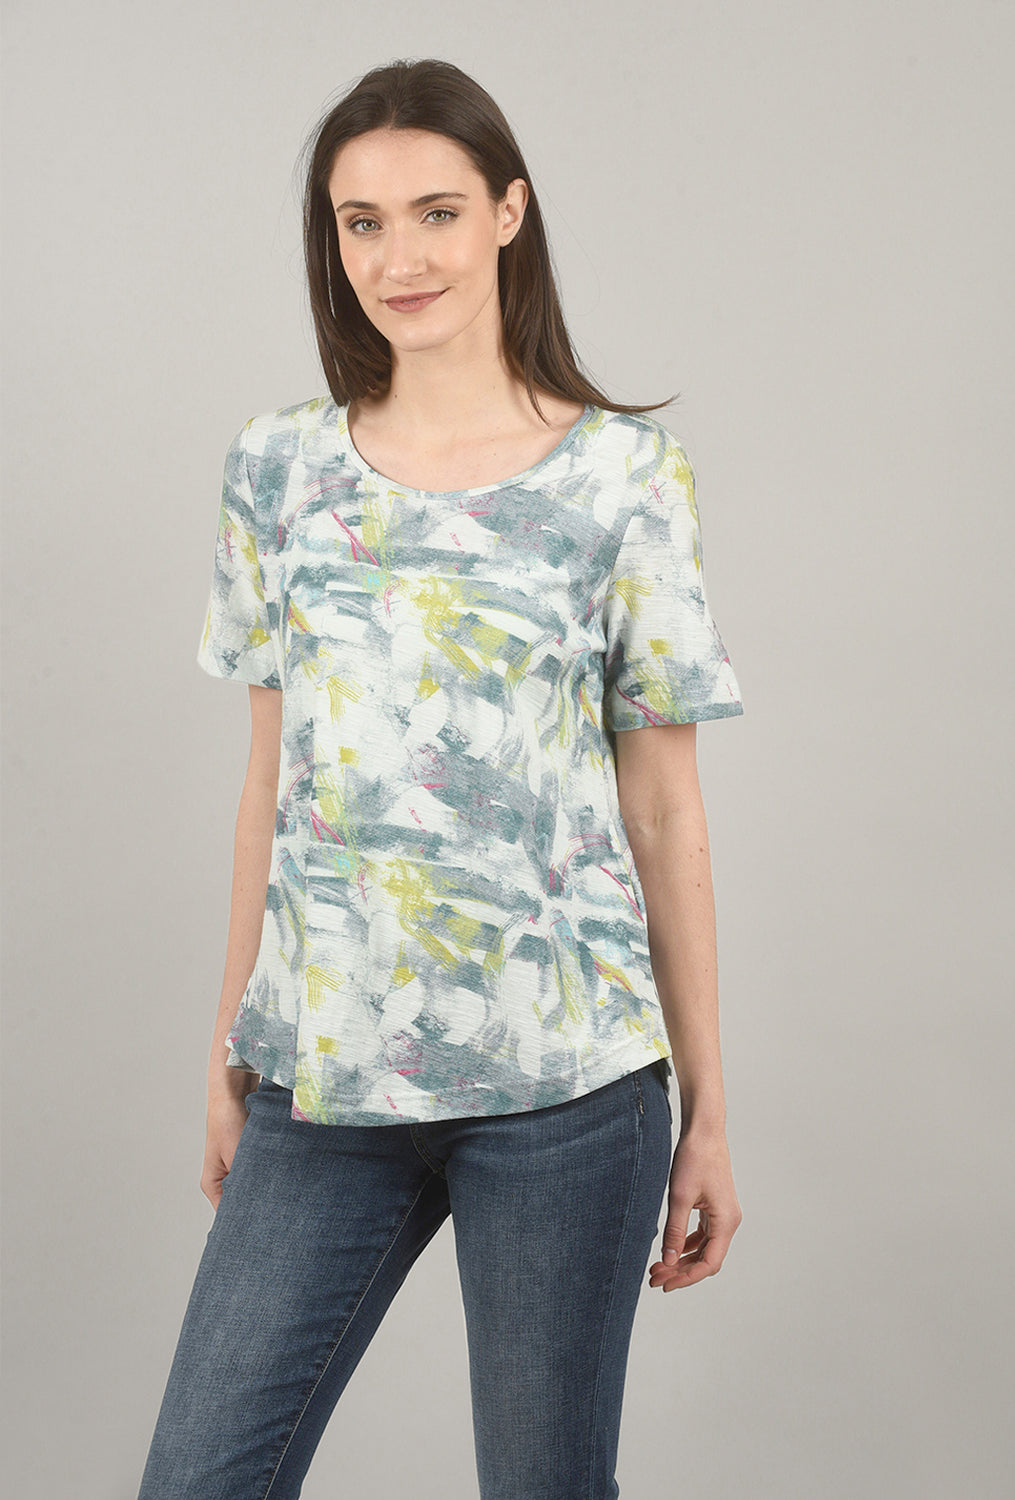 Painterly Tee, Blue Watercolor